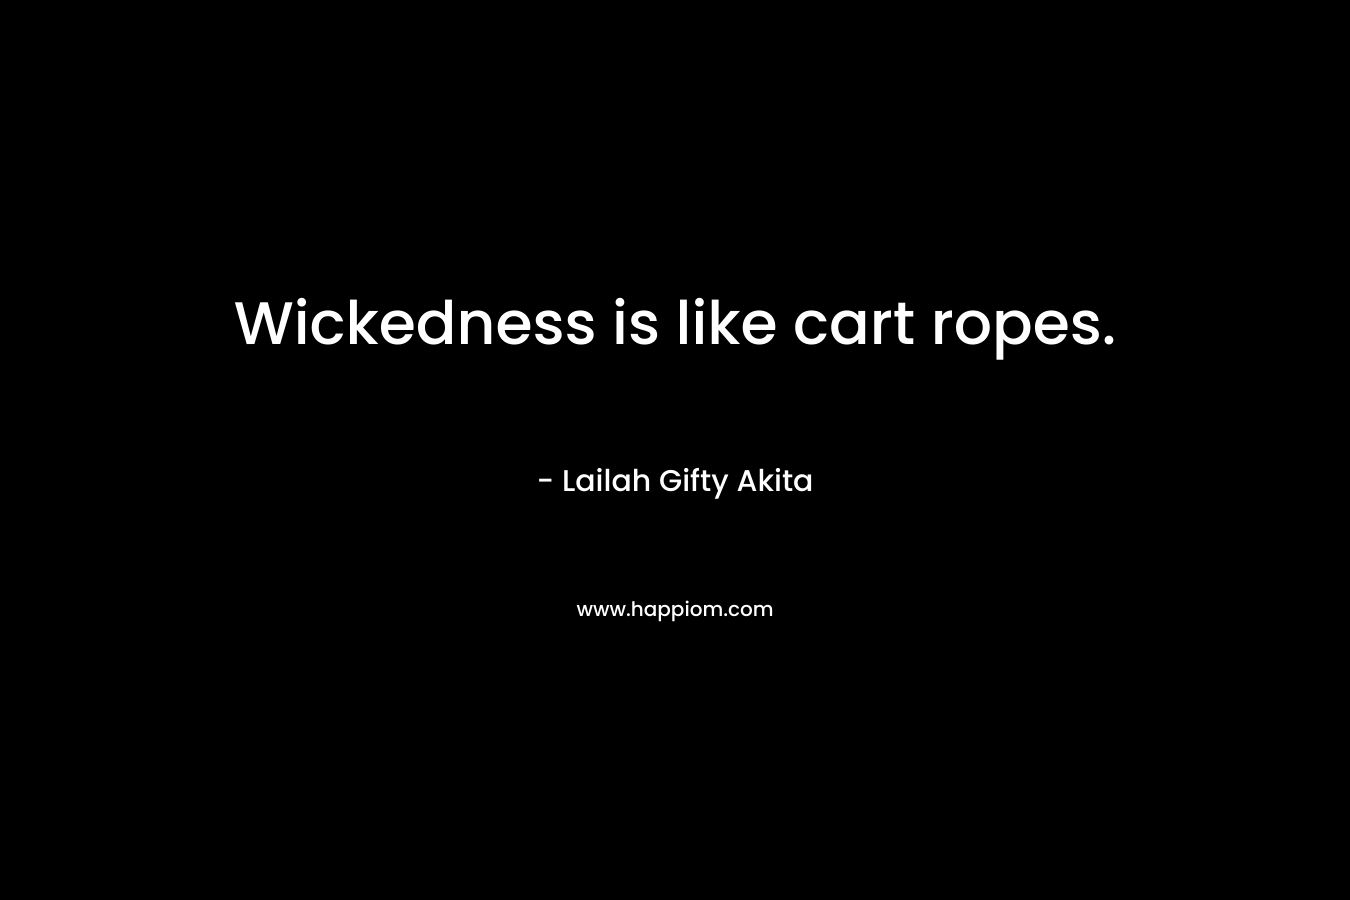 Wickedness is like cart ropes. – Lailah Gifty Akita